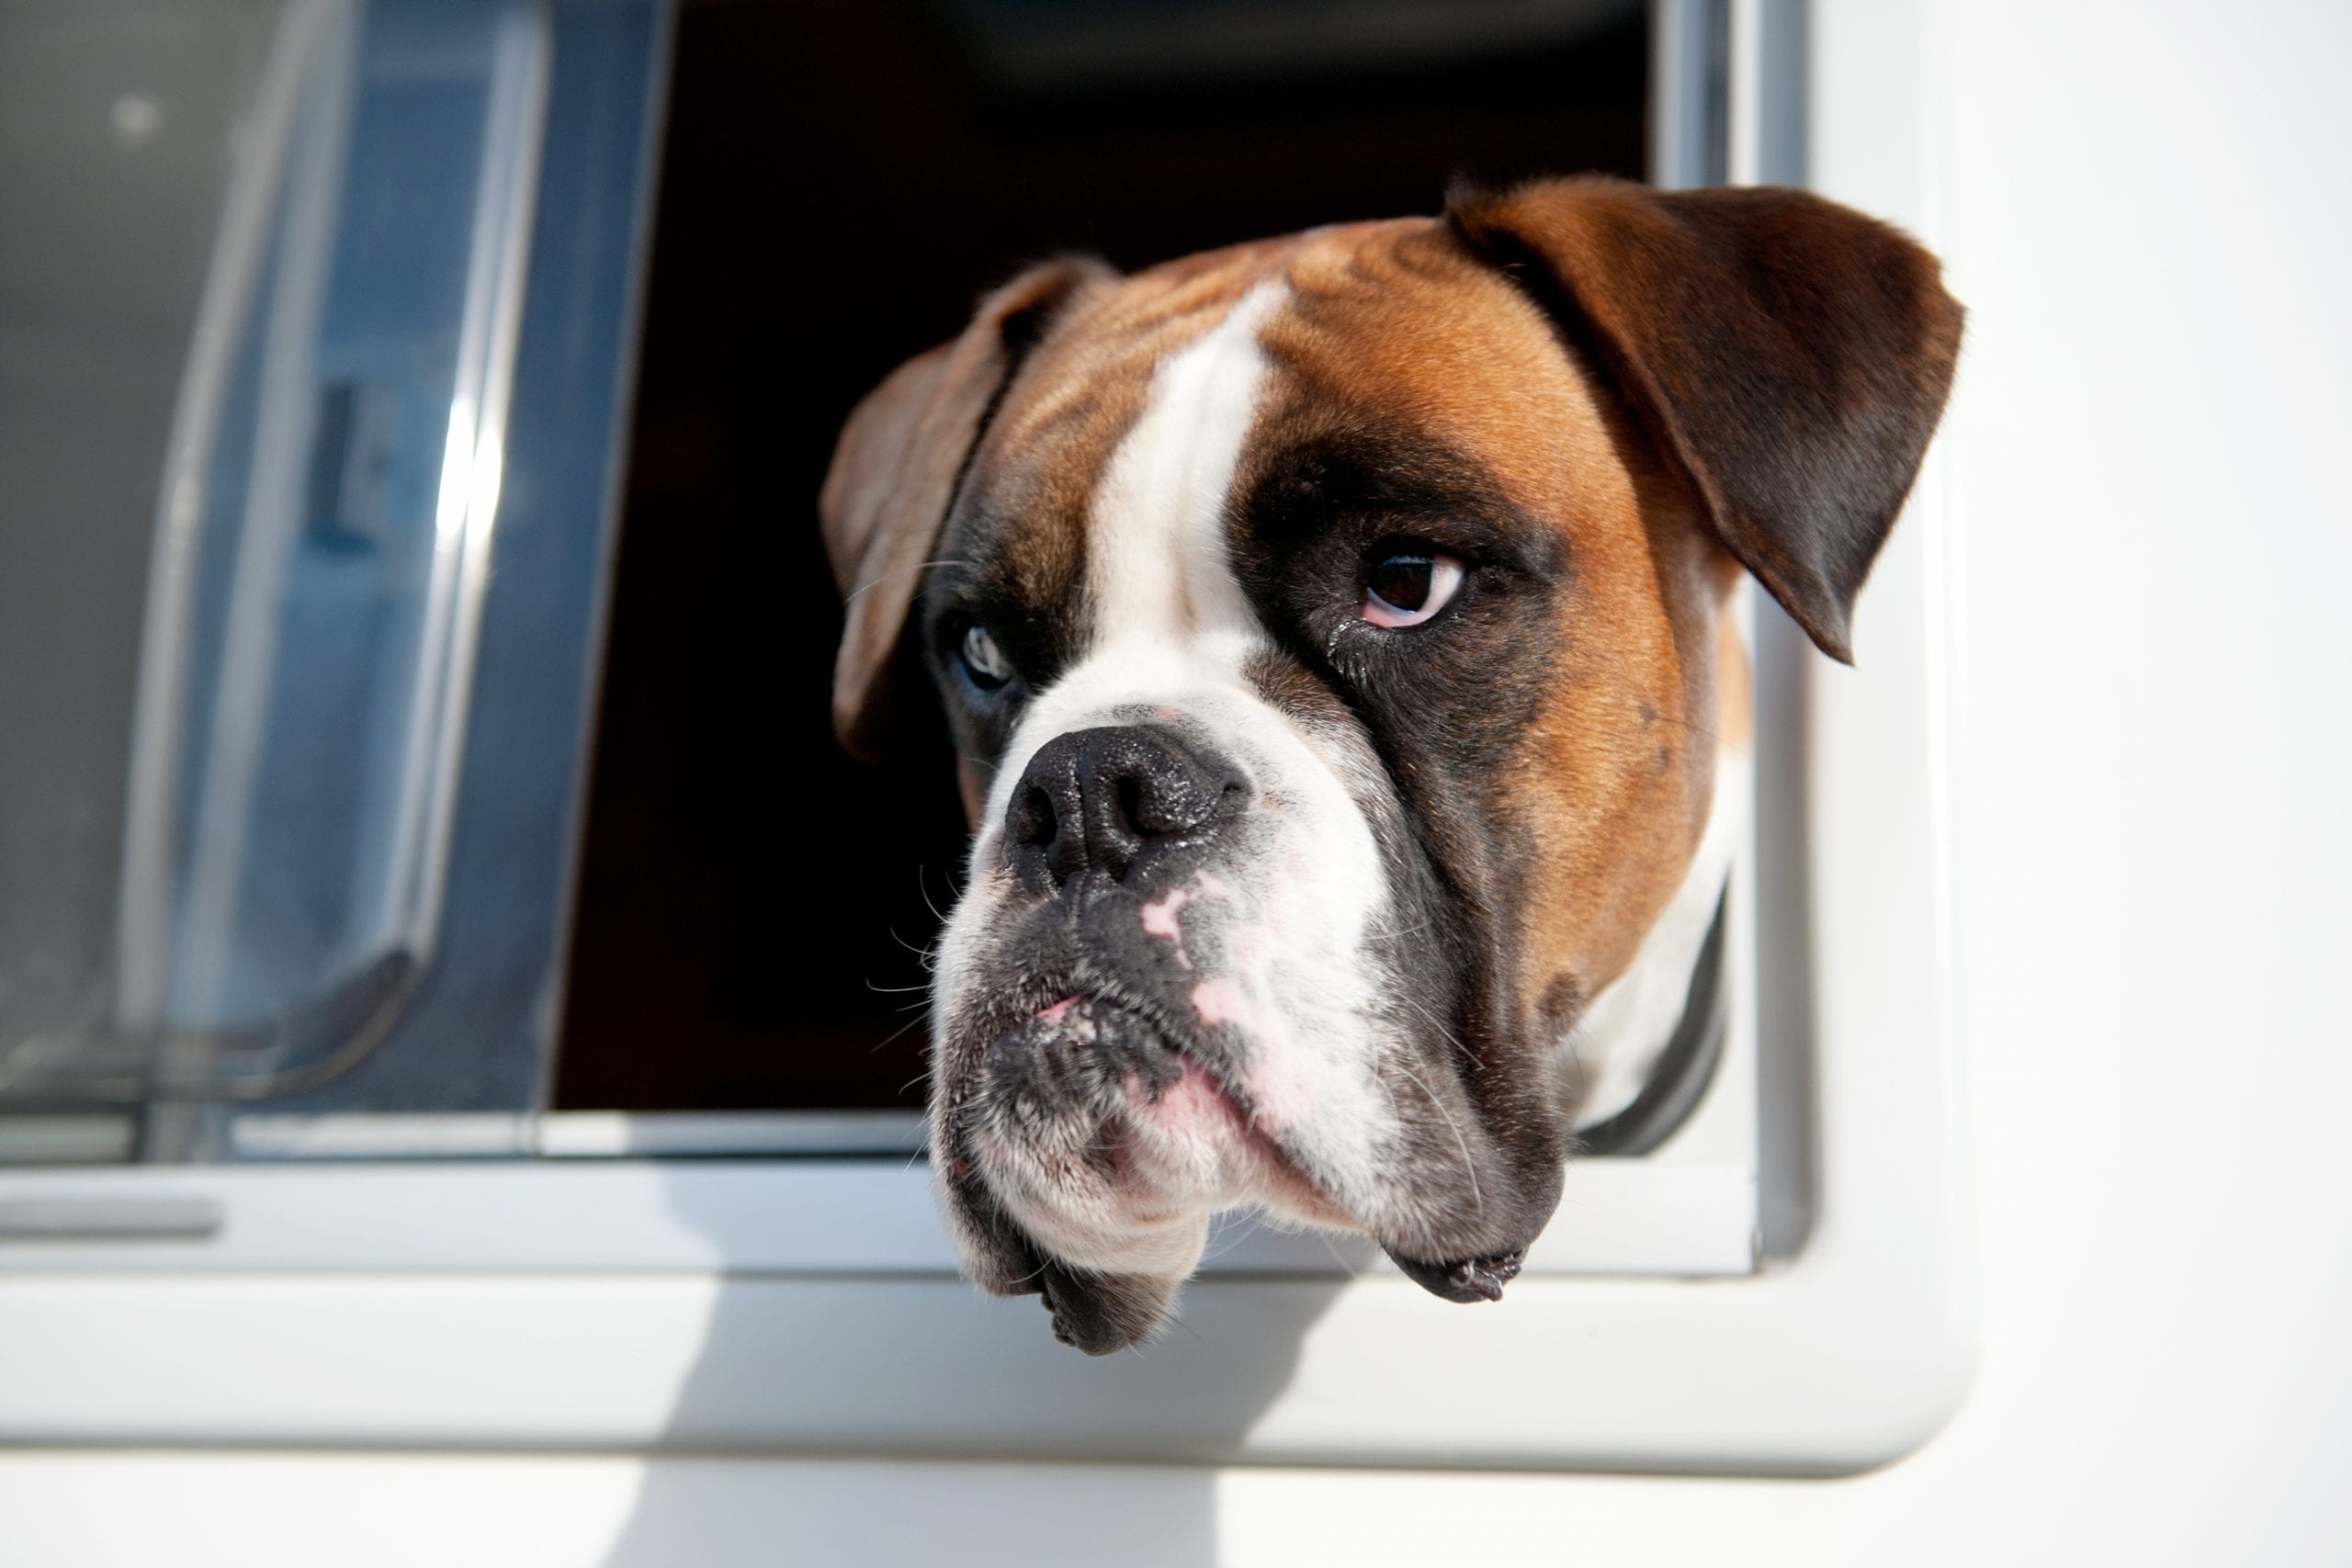 New Study Shows Unrestrained Dogs in Moving Vehicles Are Dangerous